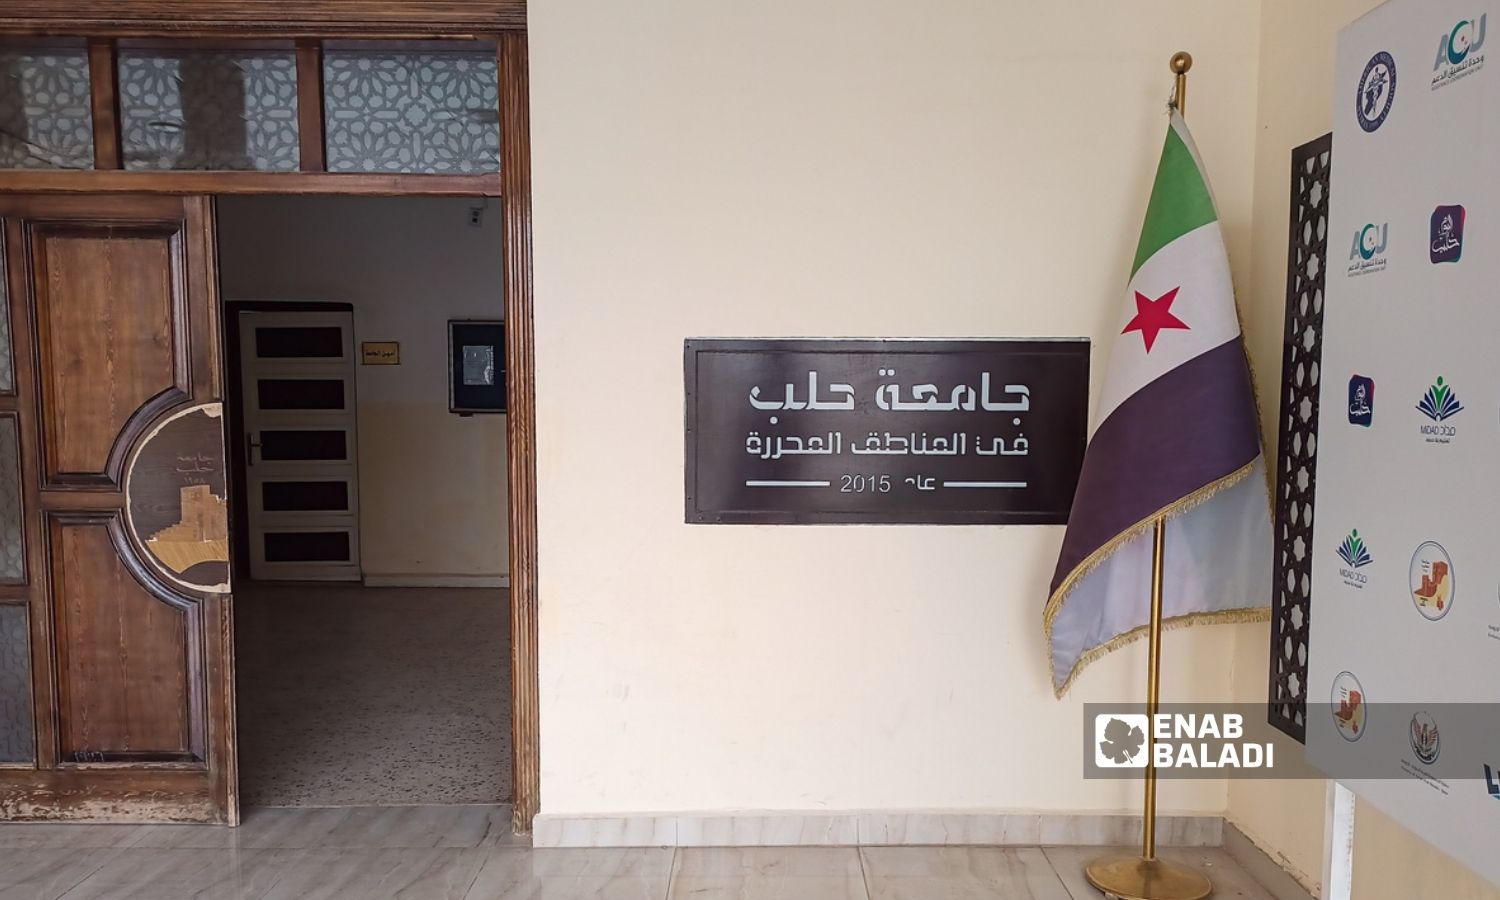 The administration entrance of the University of Aleppo in the liberated areas in Azaz city in the northern countryside of Aleppo - 29 November 2022 (Enab Baladi/Dayan Junpaz)